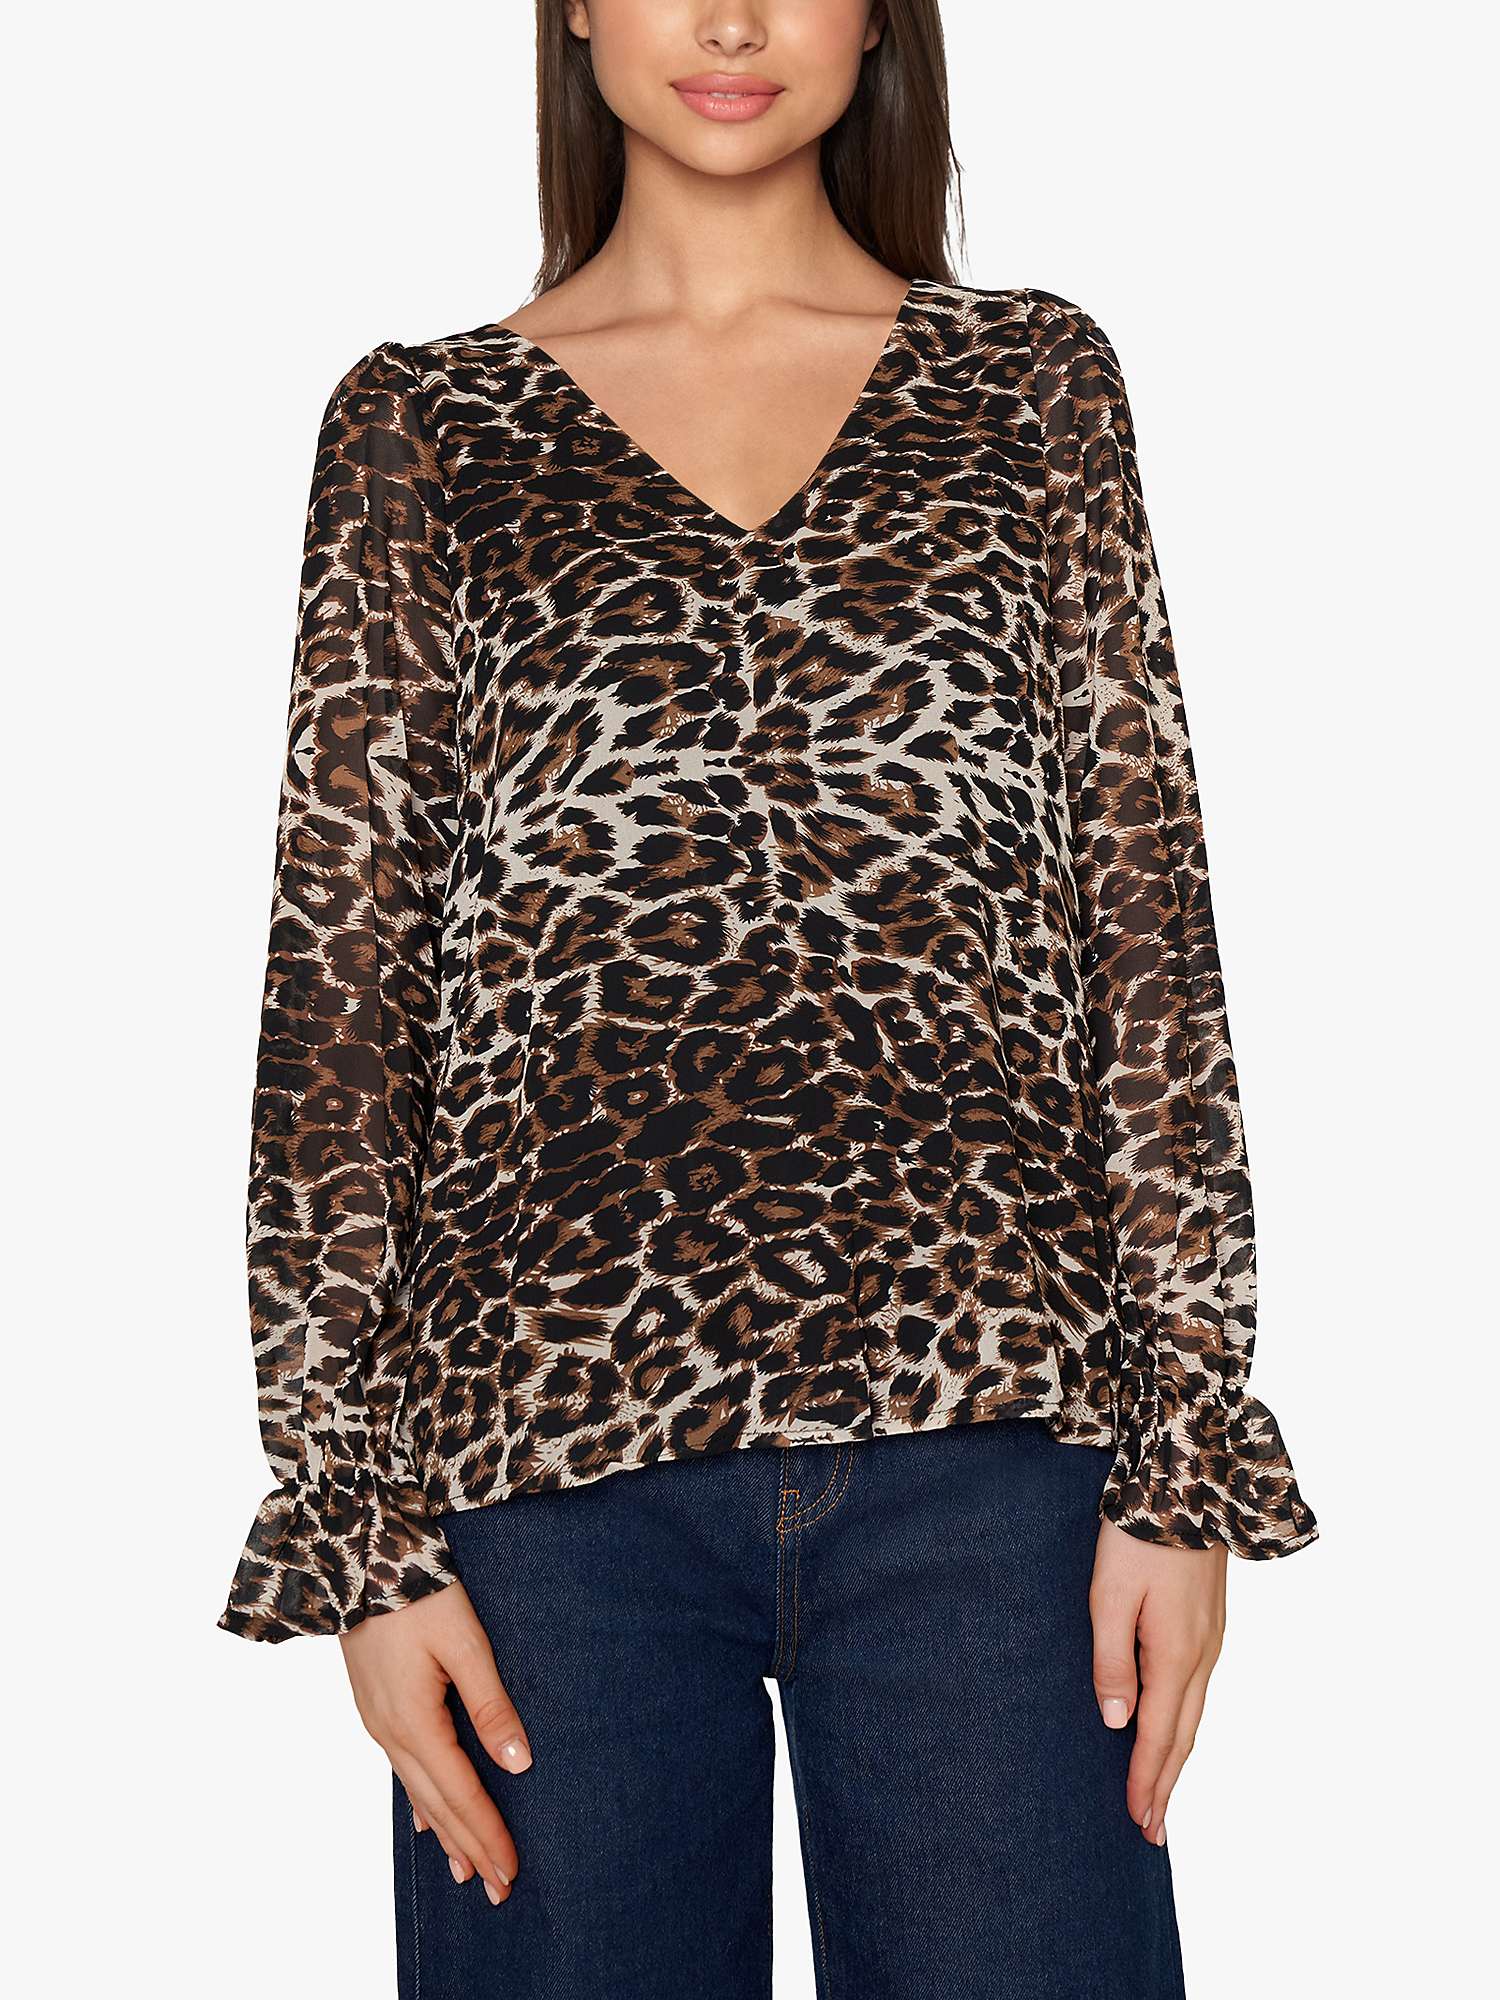 Buy Sisters Point Frill Animal Print Blouse, Leo Online at johnlewis.com